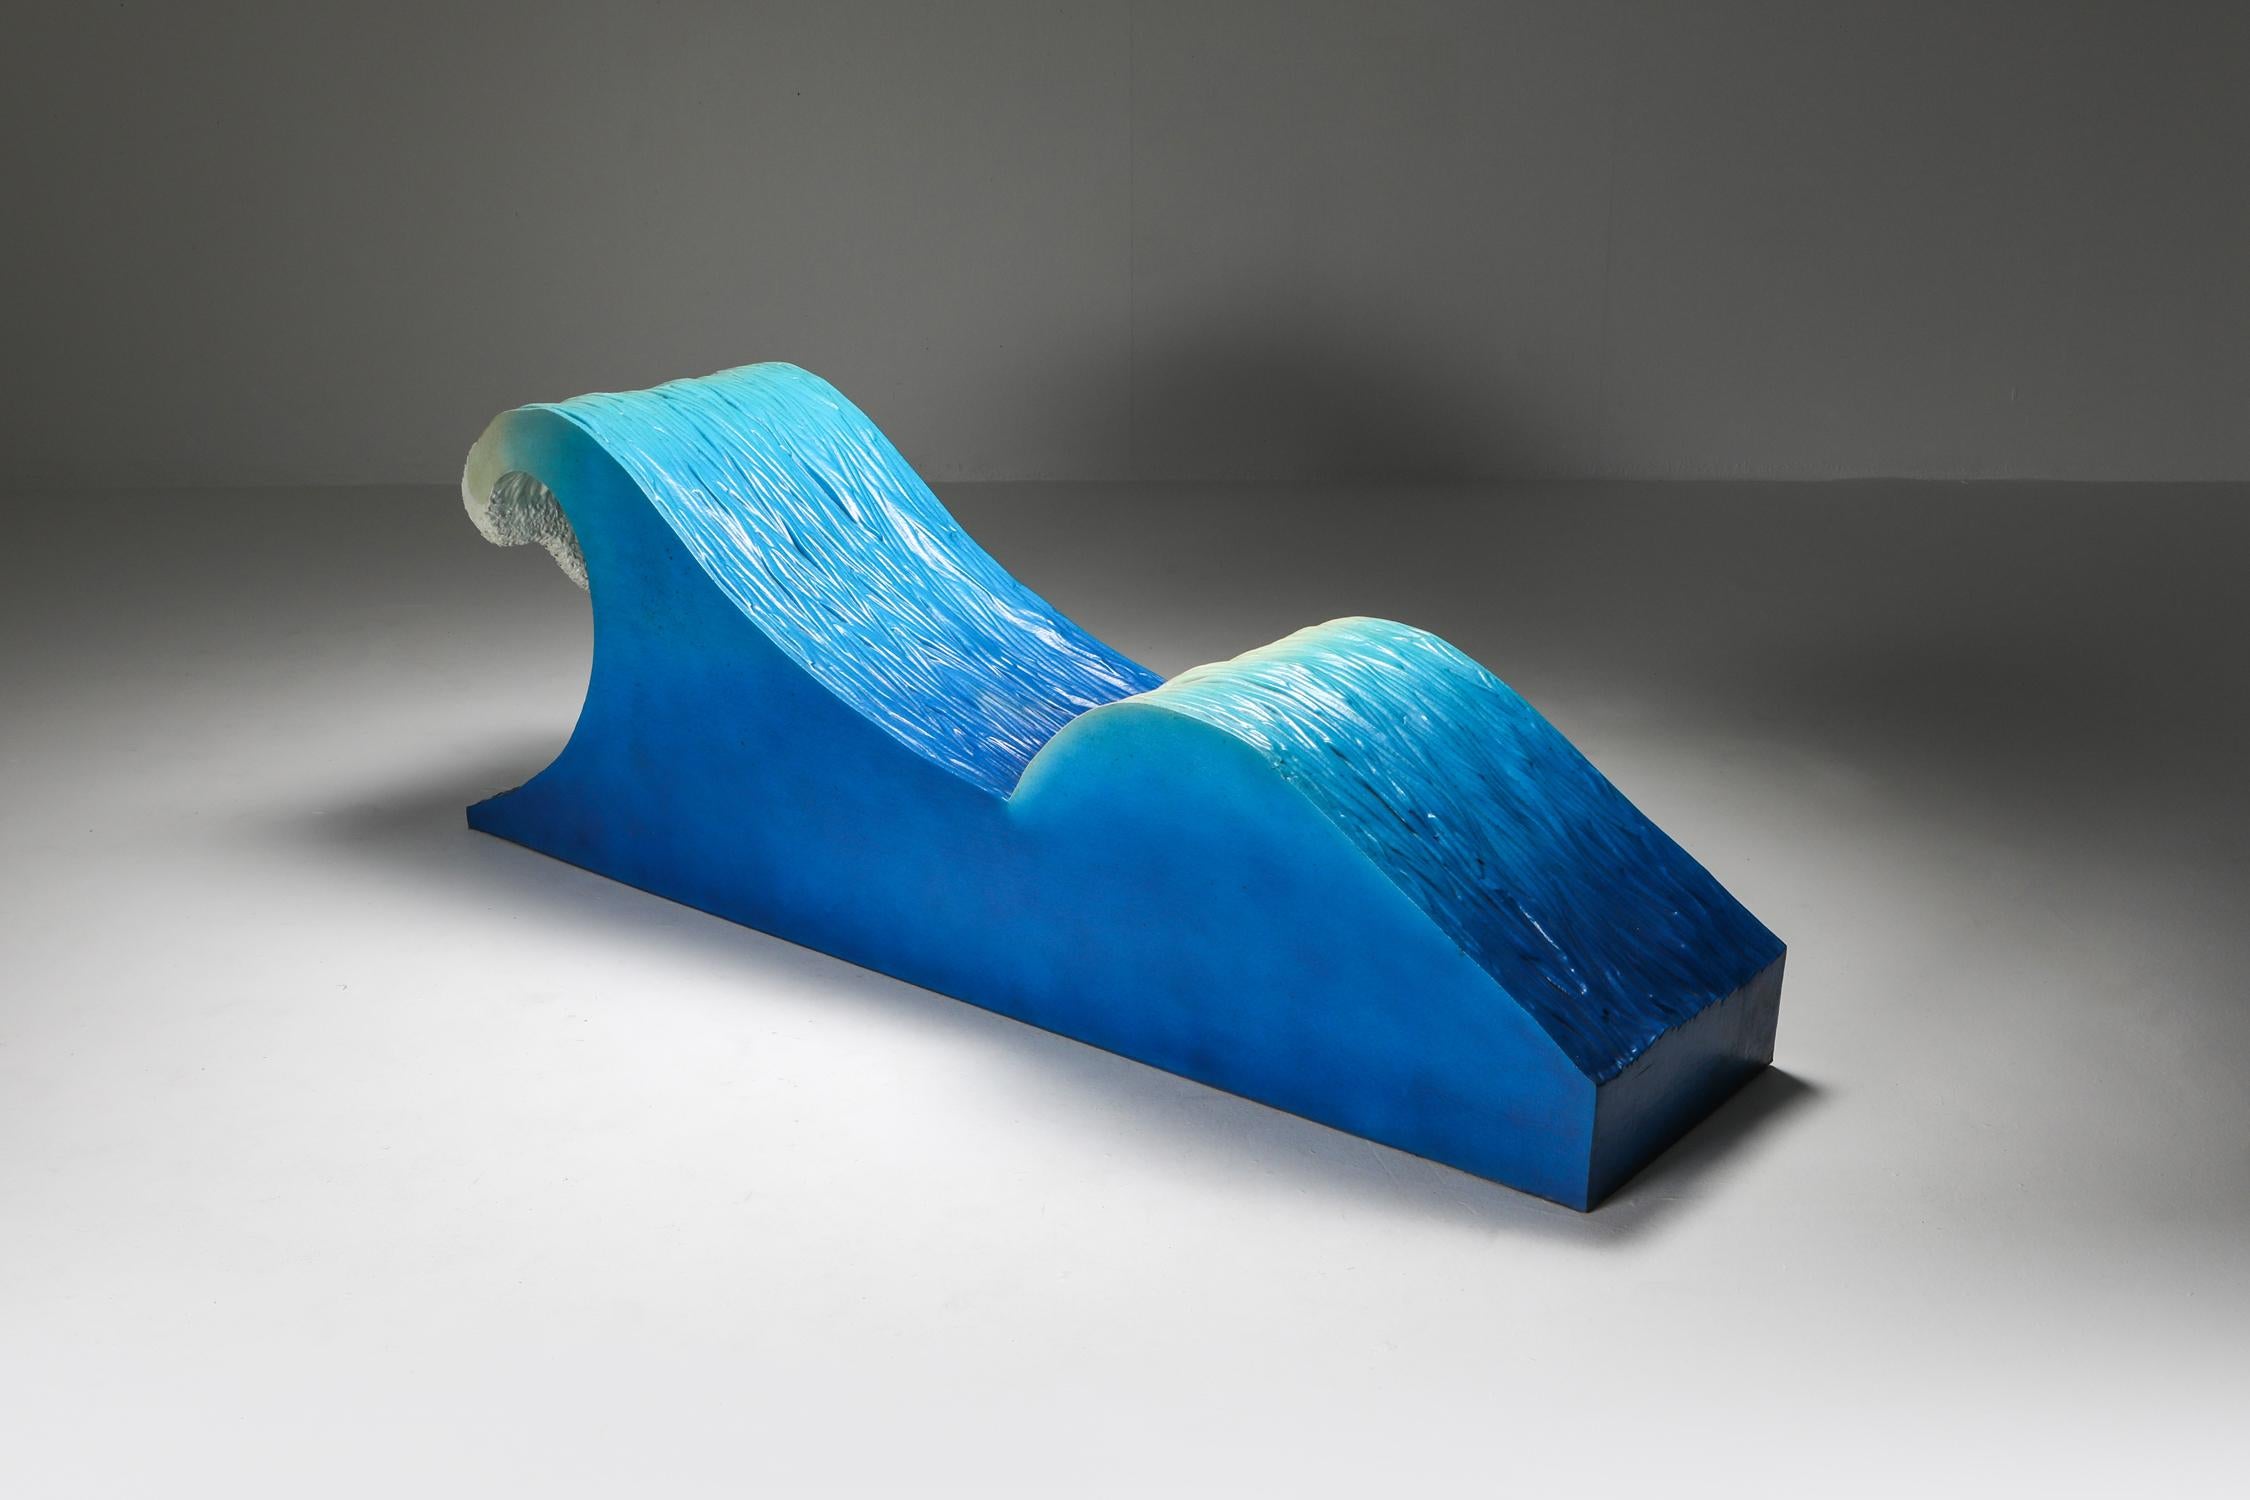 Kanagawa chaise longue, pop art, polyurethan foam, Italy, 1970s.

What better iconic image to turn into a lounge chair as the famous Japanese Kanagawa Wave.
A true Avant-Garde pop art piece.

The Great Wave off Kanagawa, also known as The Great